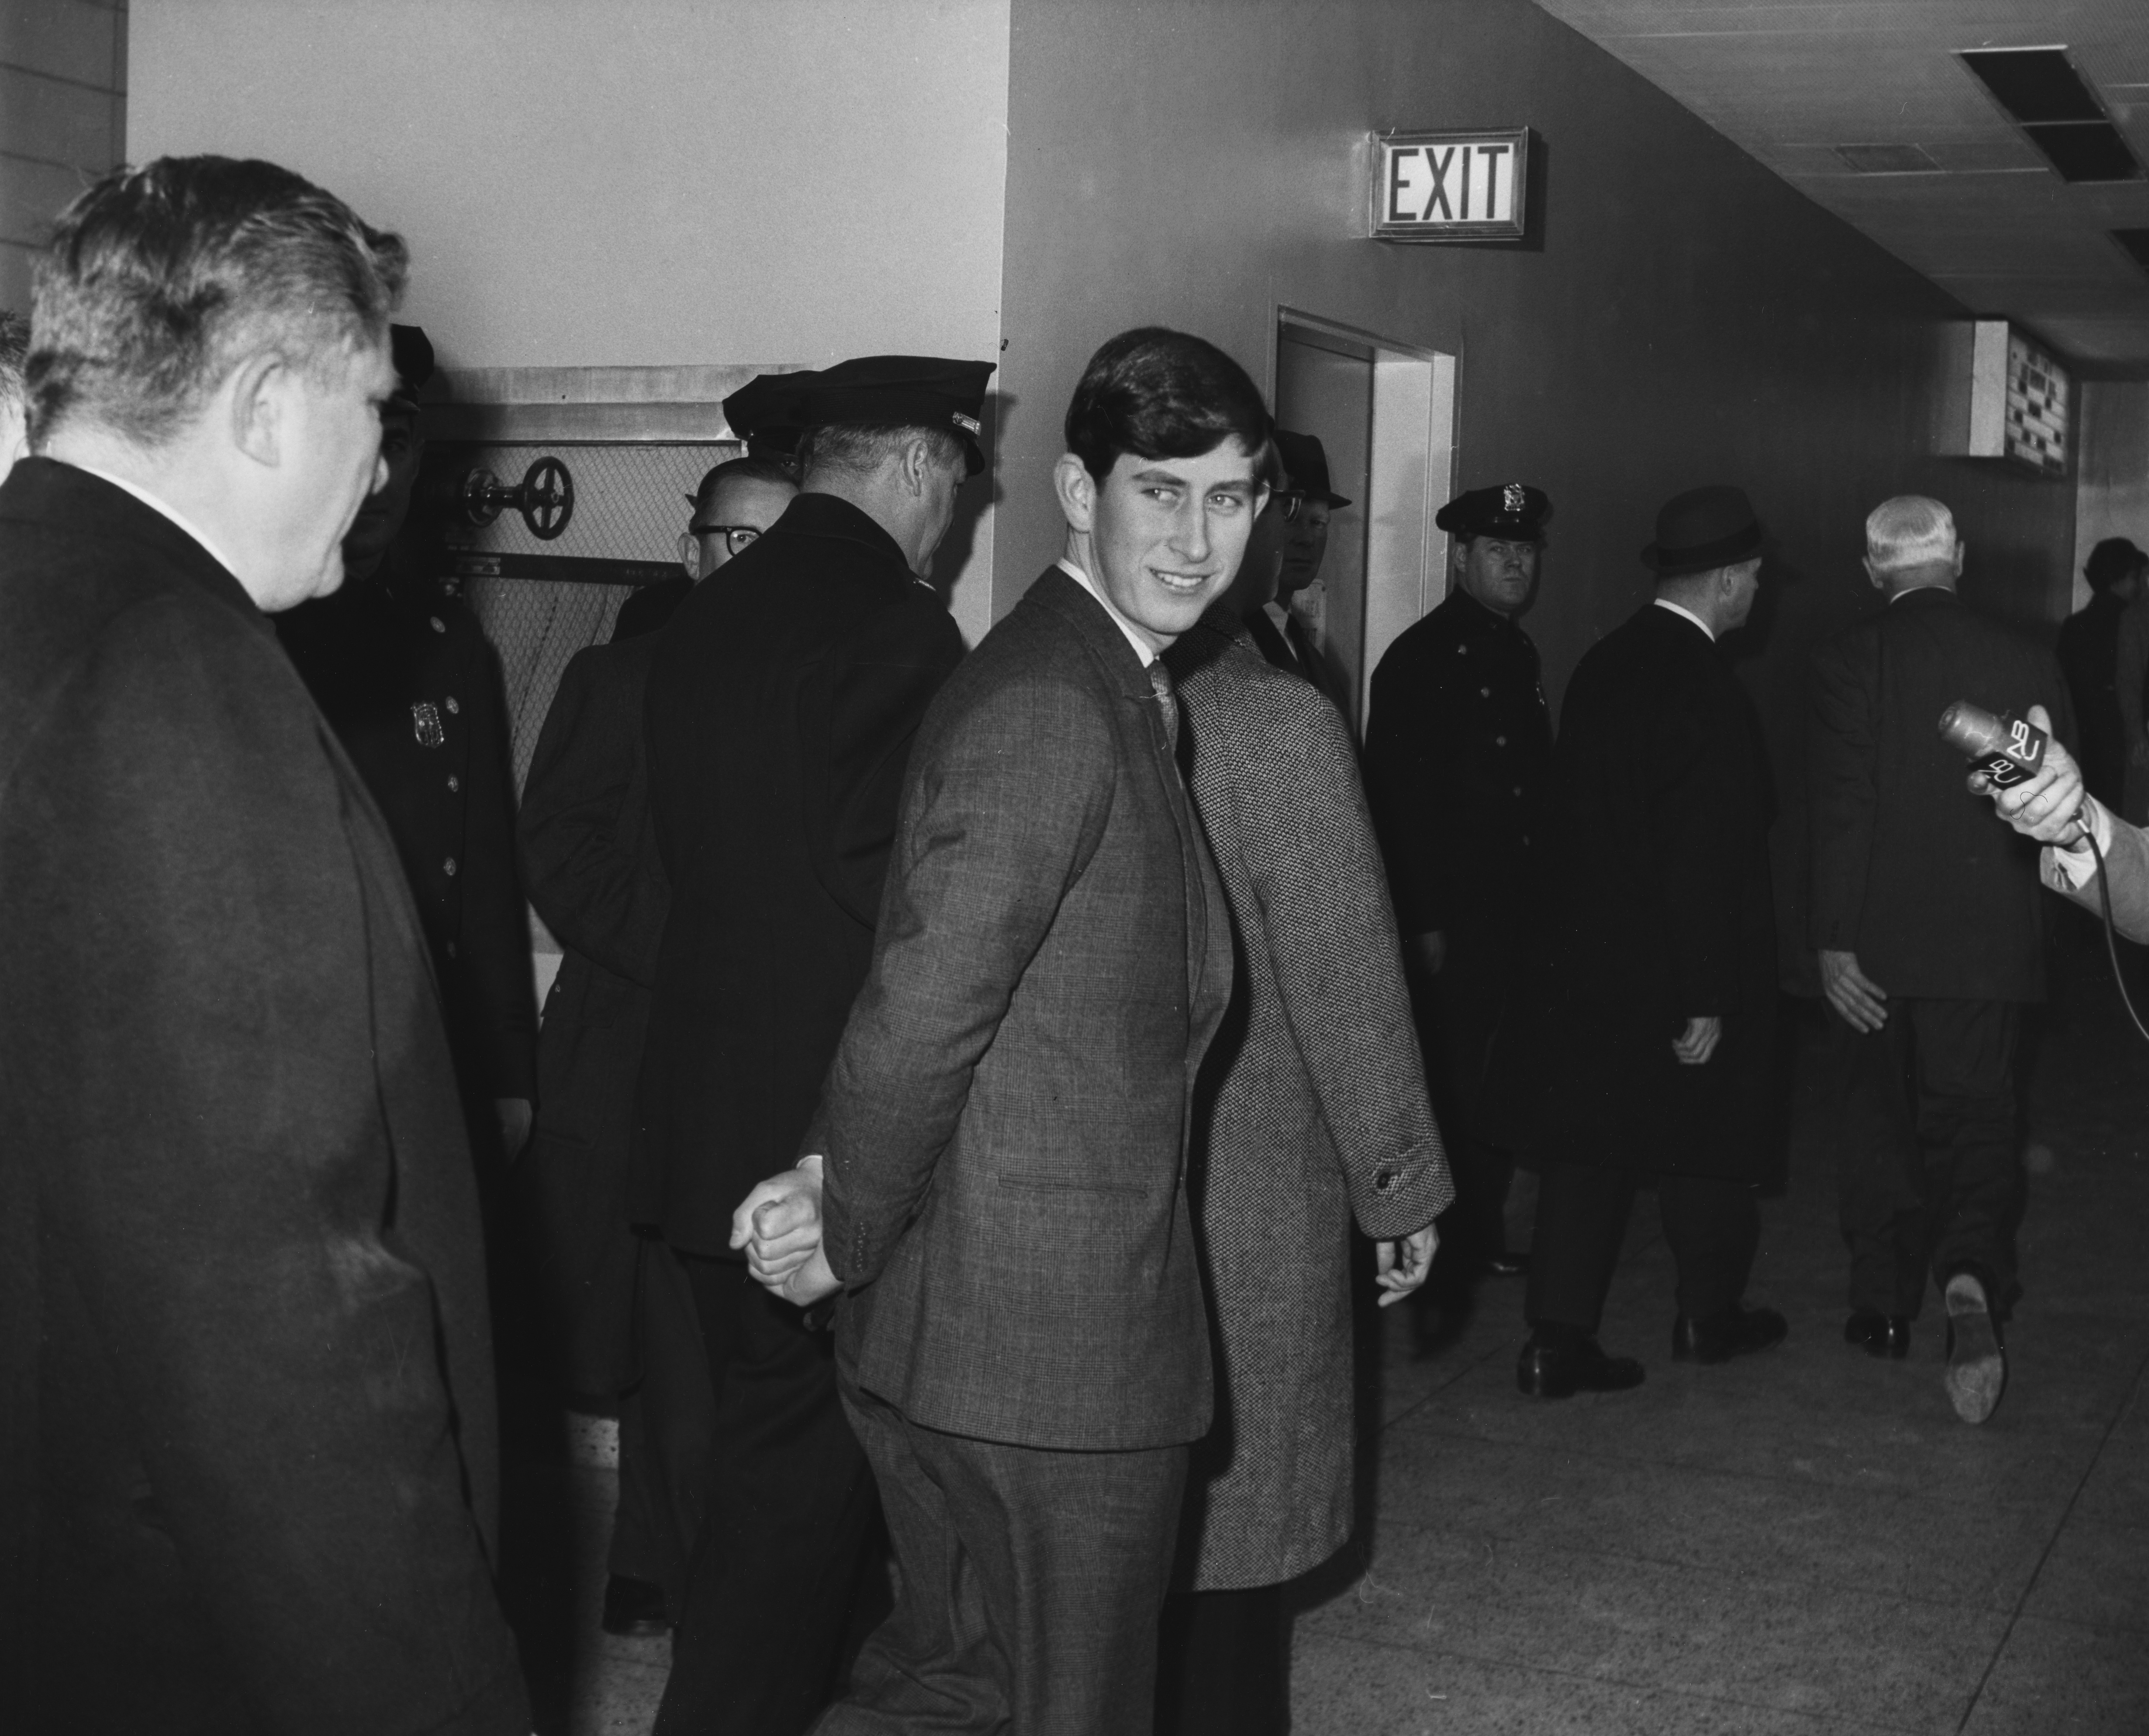 Prince Charles passing through New York's John F. Kennedy International Airport en route to Australia where he was to study at Geelong Grammar’s Timbertop school in Victoria in January 1966 | Source: Getty Images